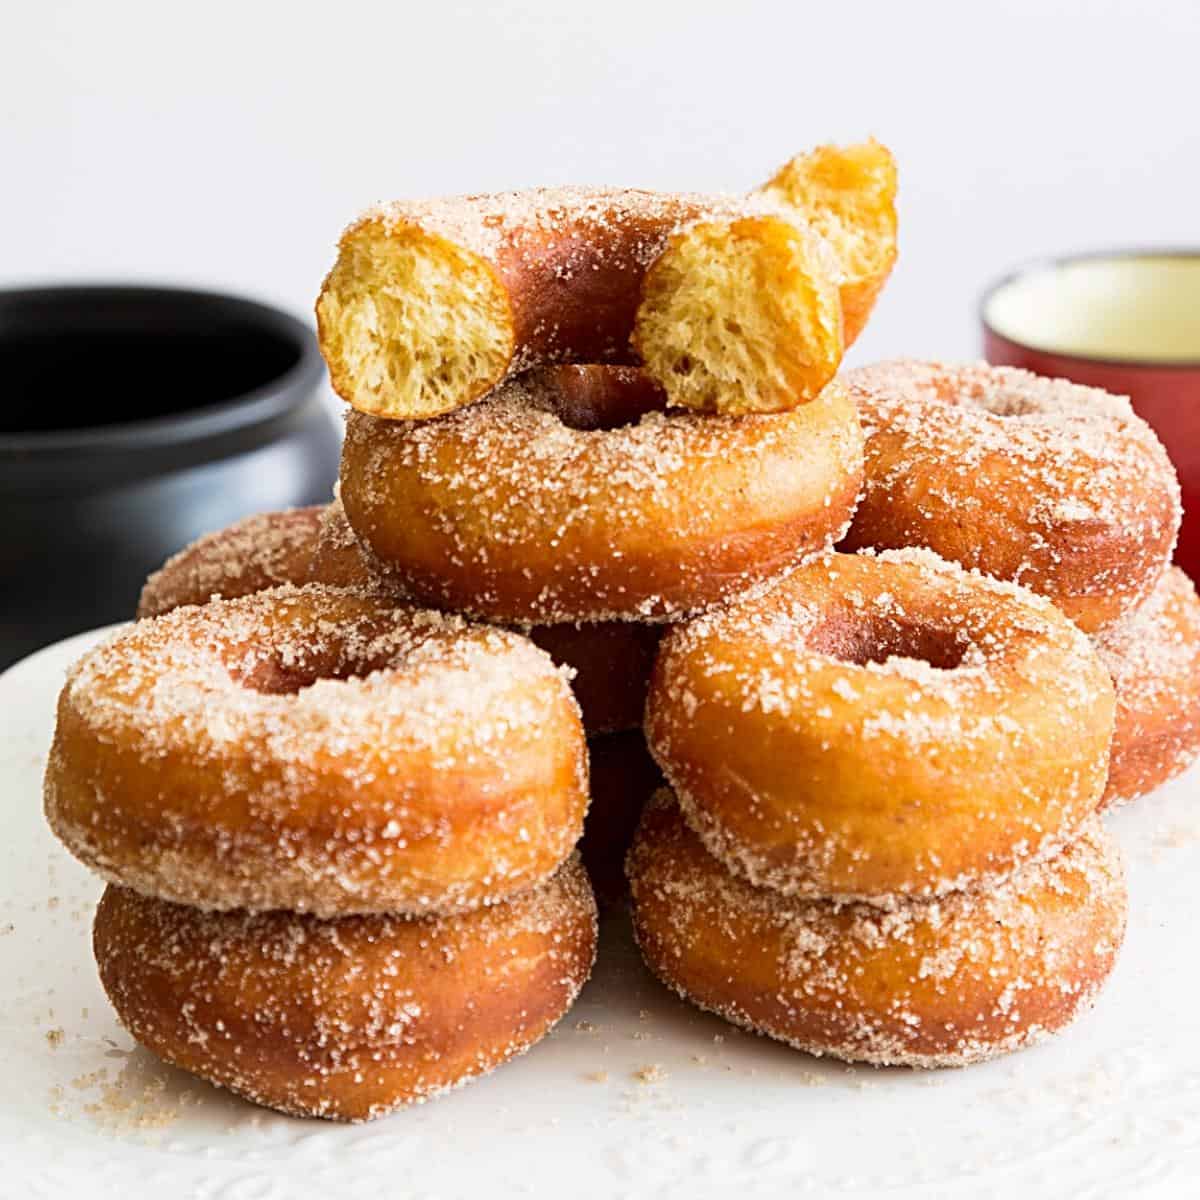 A stack of donuts.